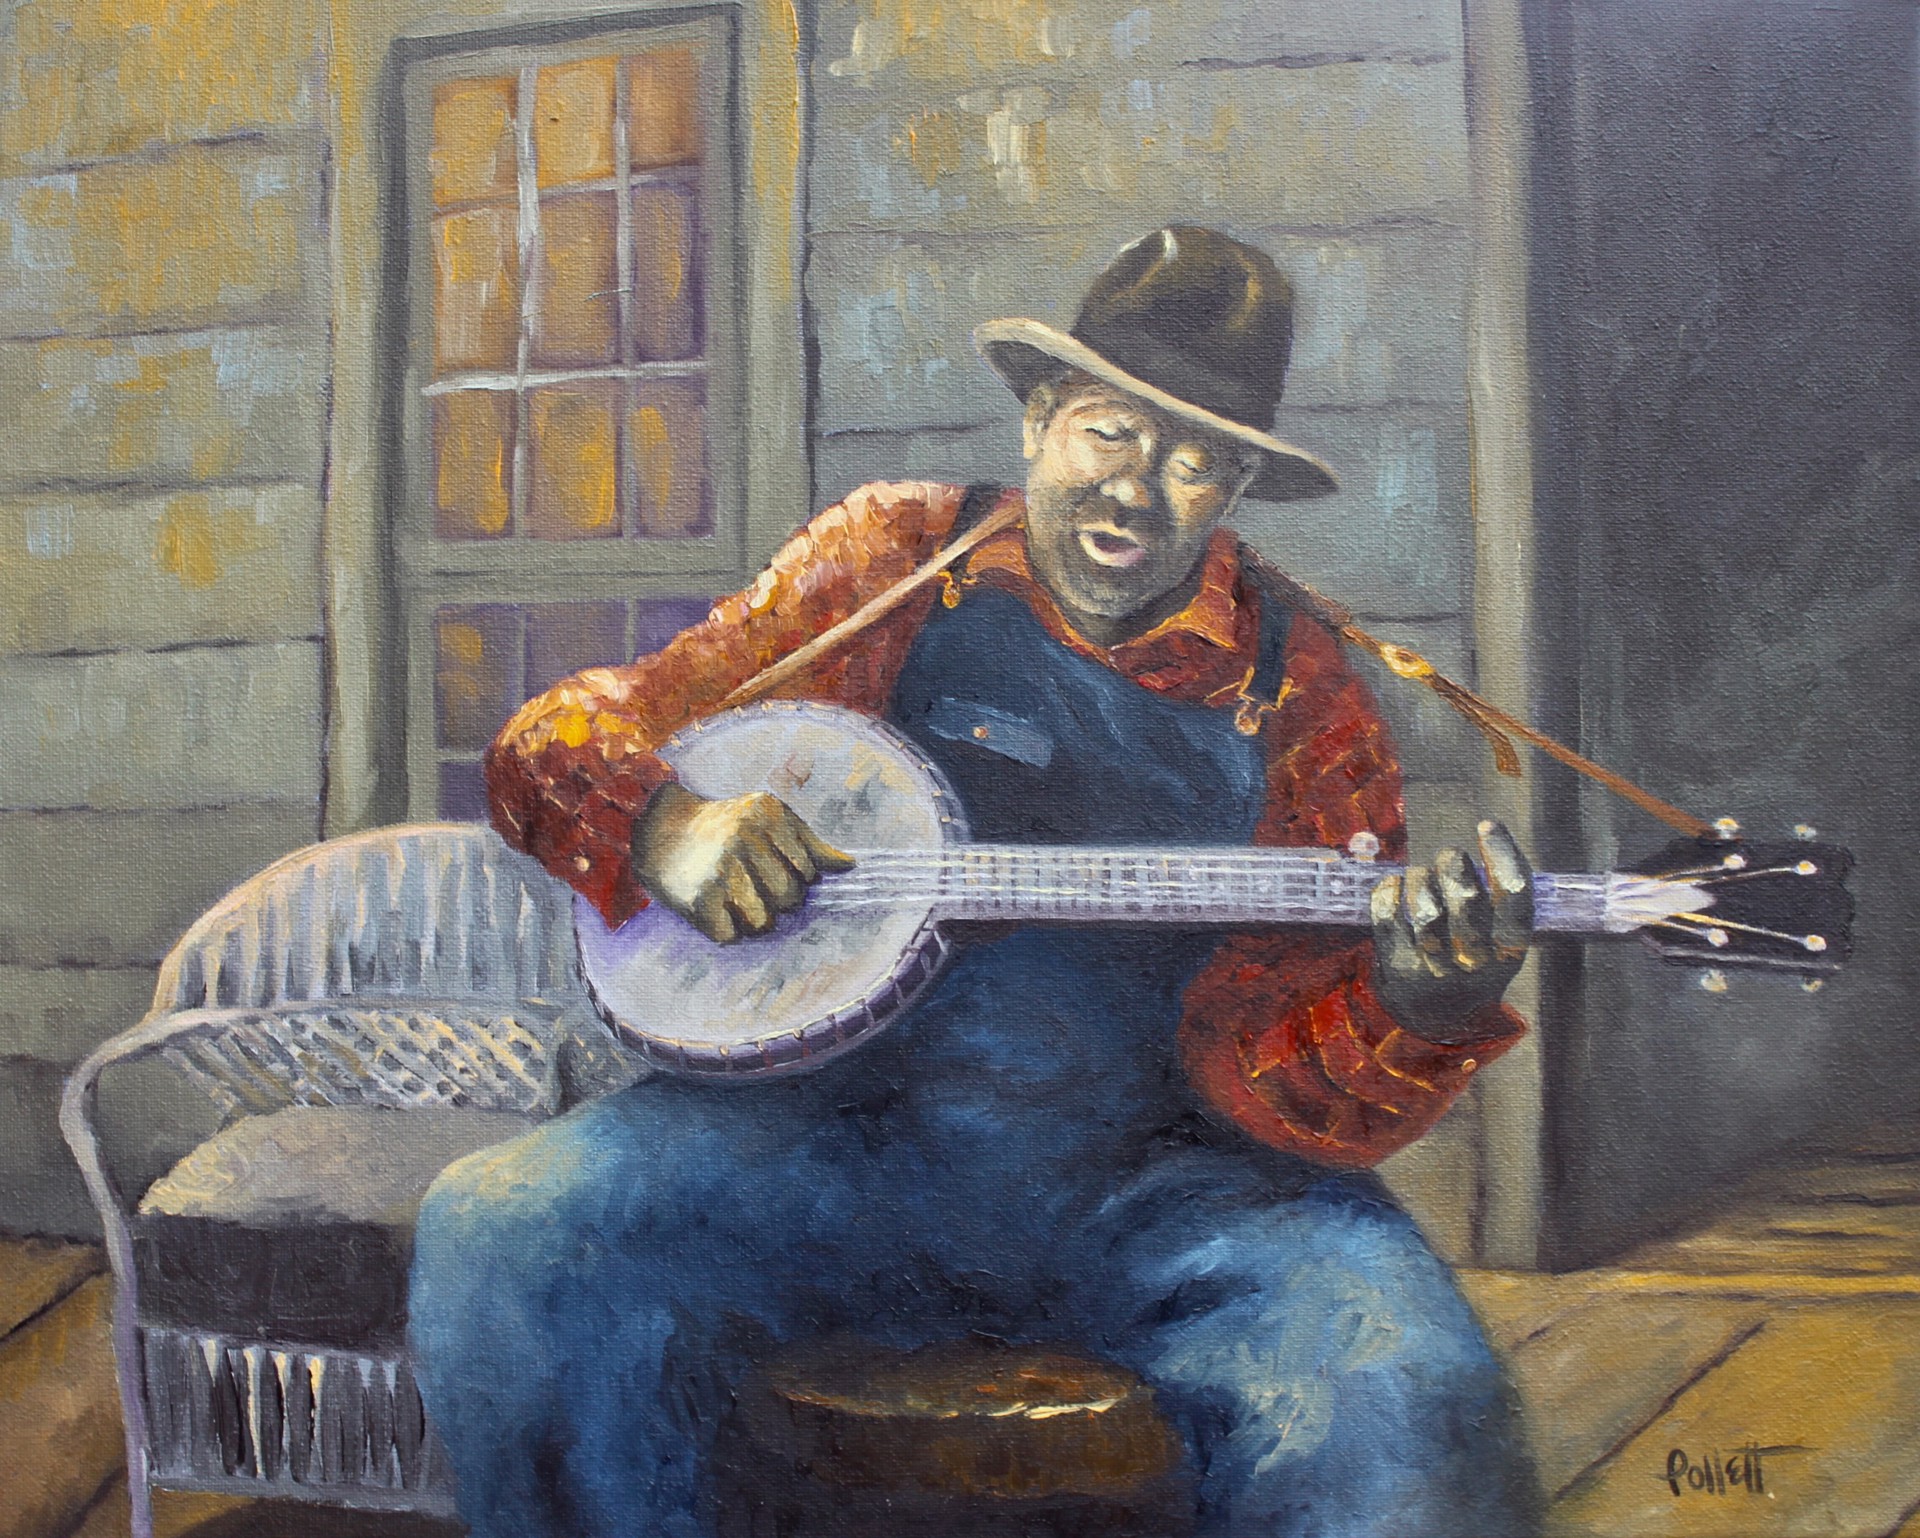 The Beginning of Blues-Bluegrass by Cynthia Jewell Pollett